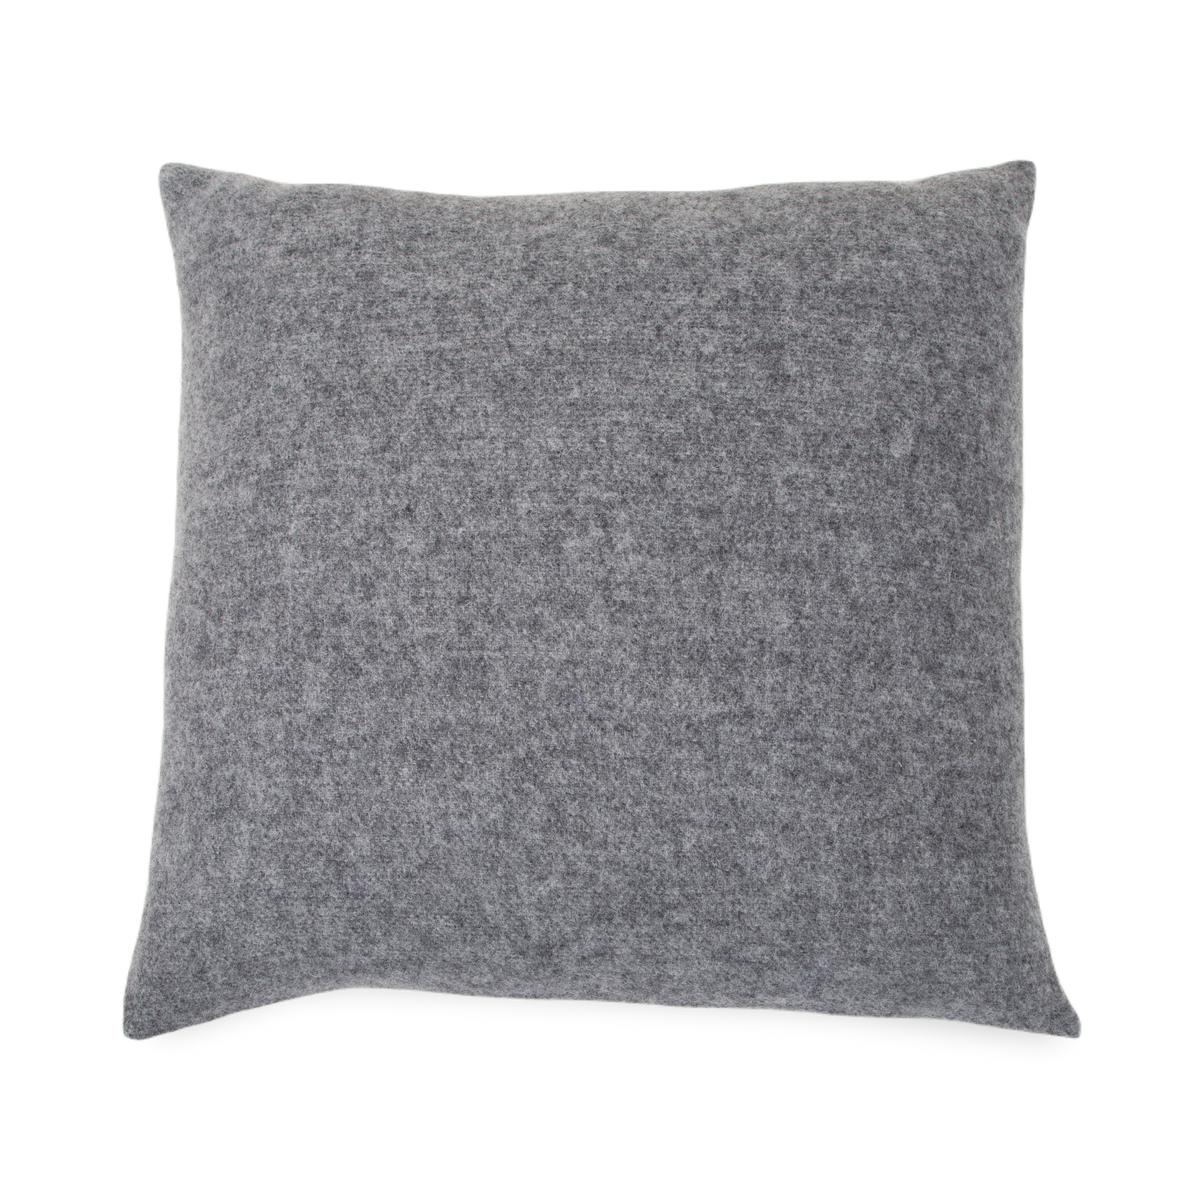 Double Sided Pillow